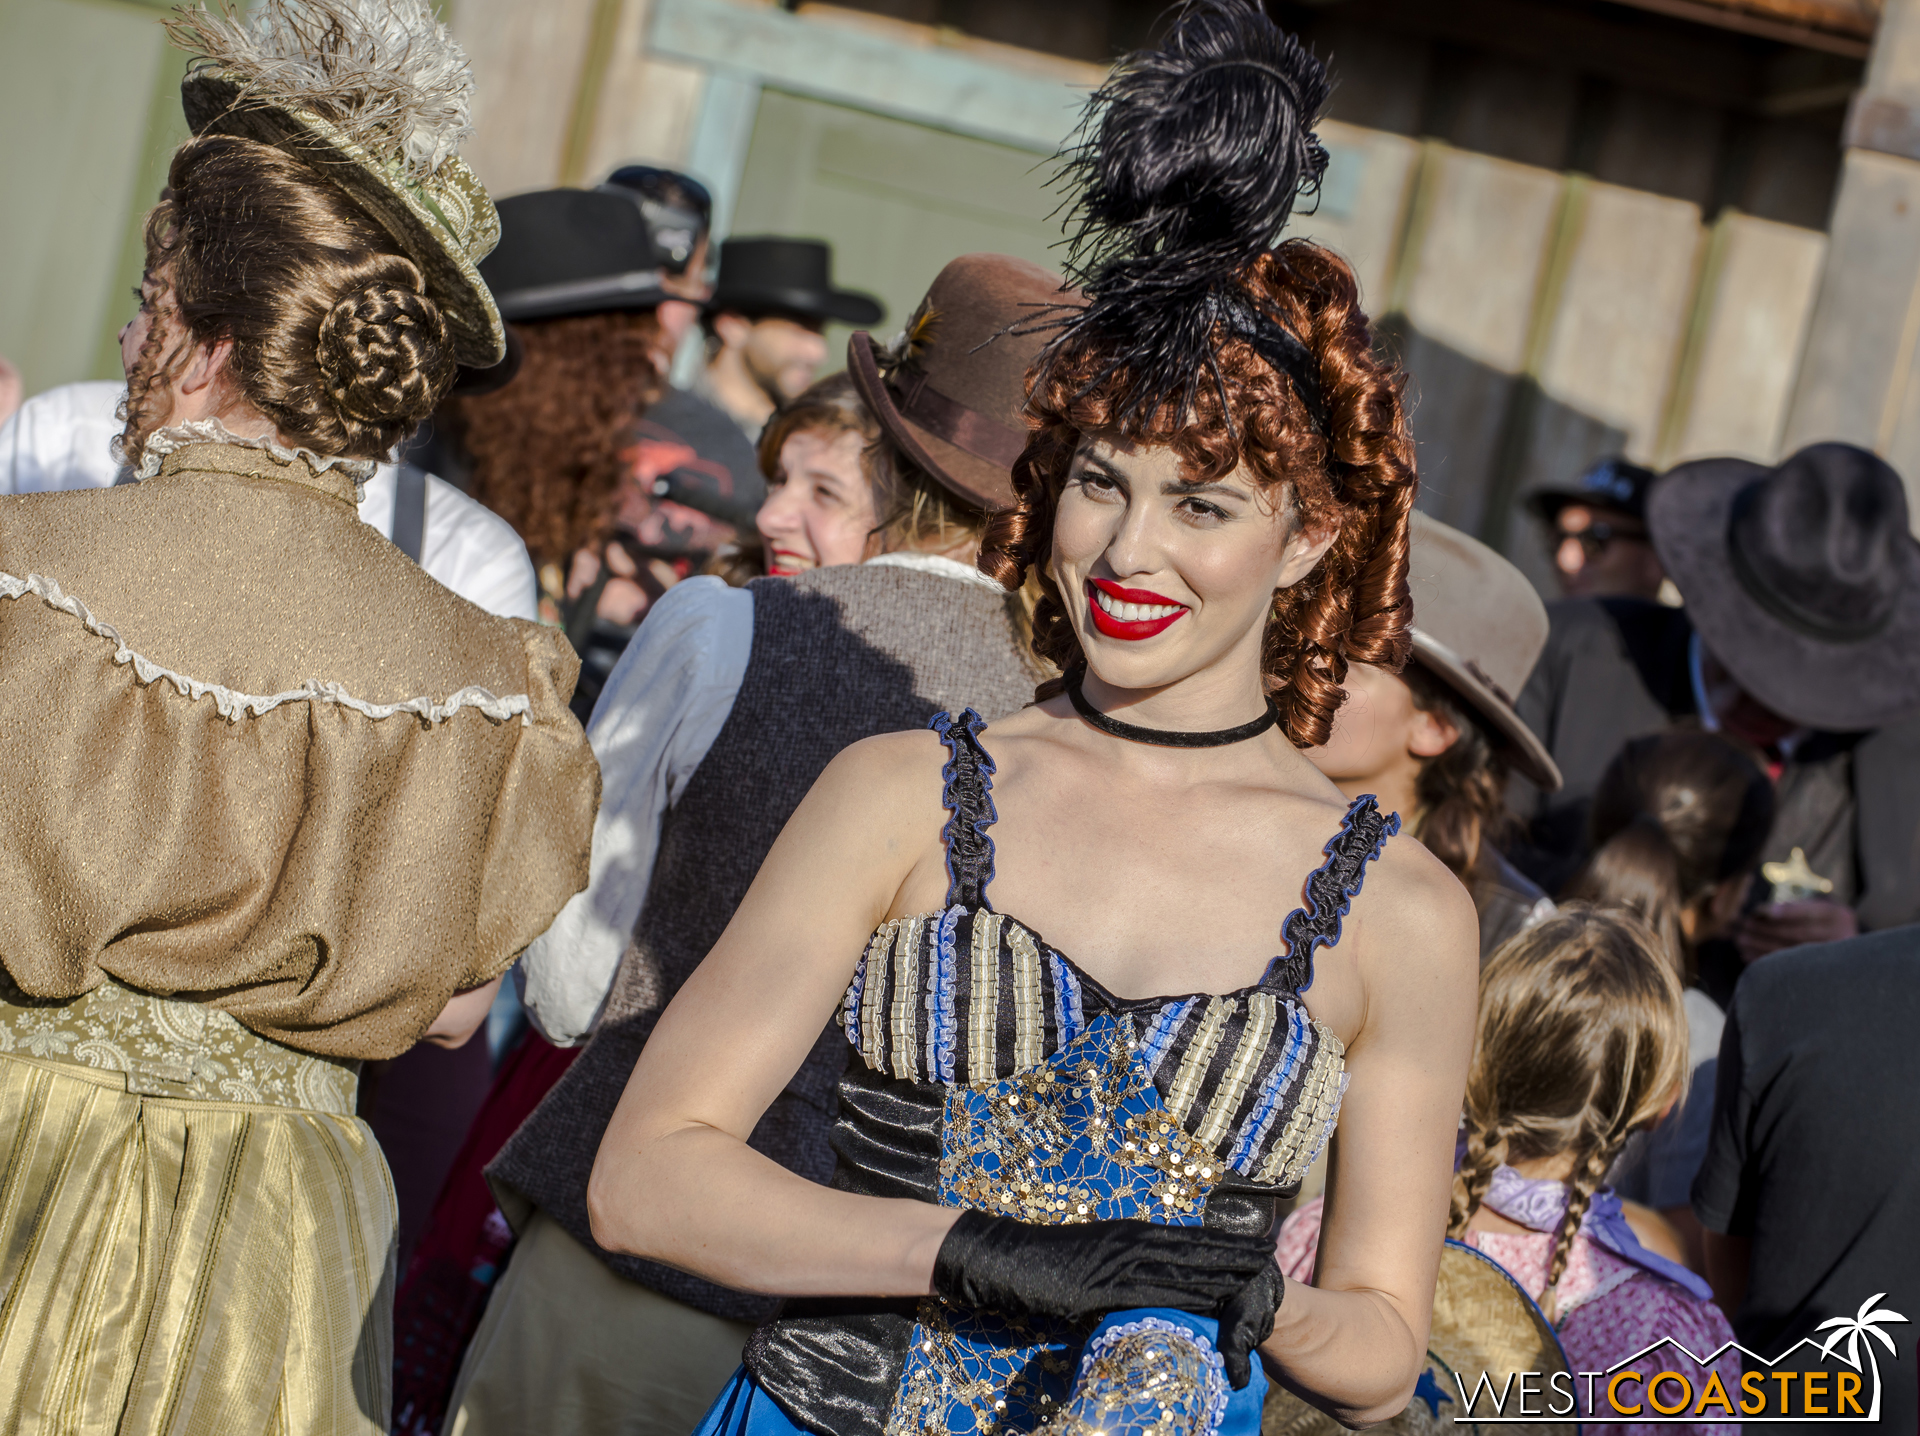  A Calico saloon girl looks on as the hoedown continues. 